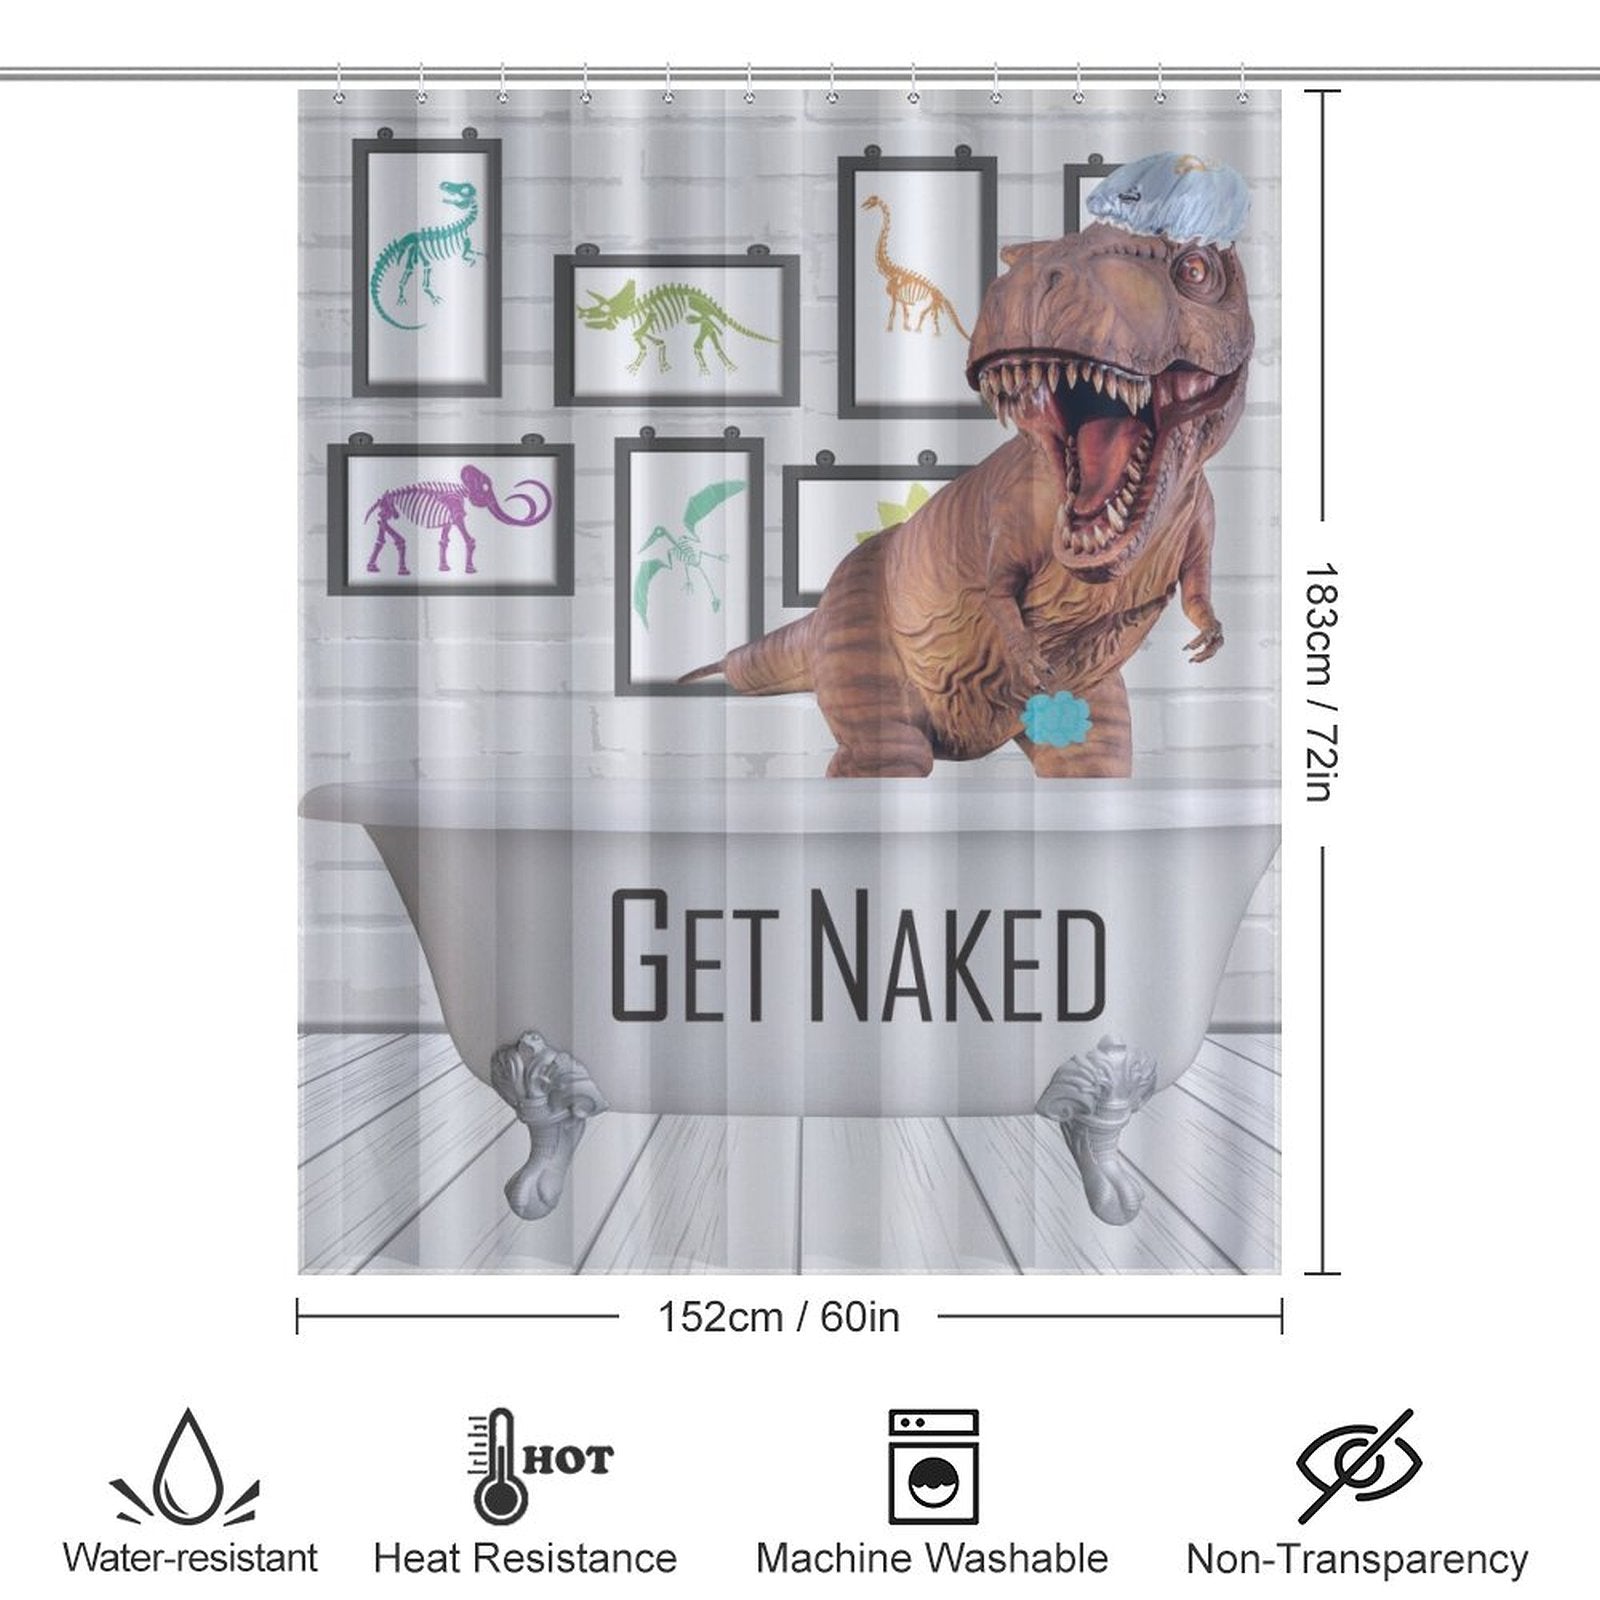 Introducing the Funny Dinosaur Get Naked Shower Curtain-Cottoncat by Cotton Cat, featuring a large dinosaur with an open mouth, smaller dinosaur illustrations in frames, and the playful text "Get Naked." This funny dinosaur shower curtain is water-resistant, heat-resistant, machine washable, and non-transparent—perfect for unique dinosaur bathroom decor.